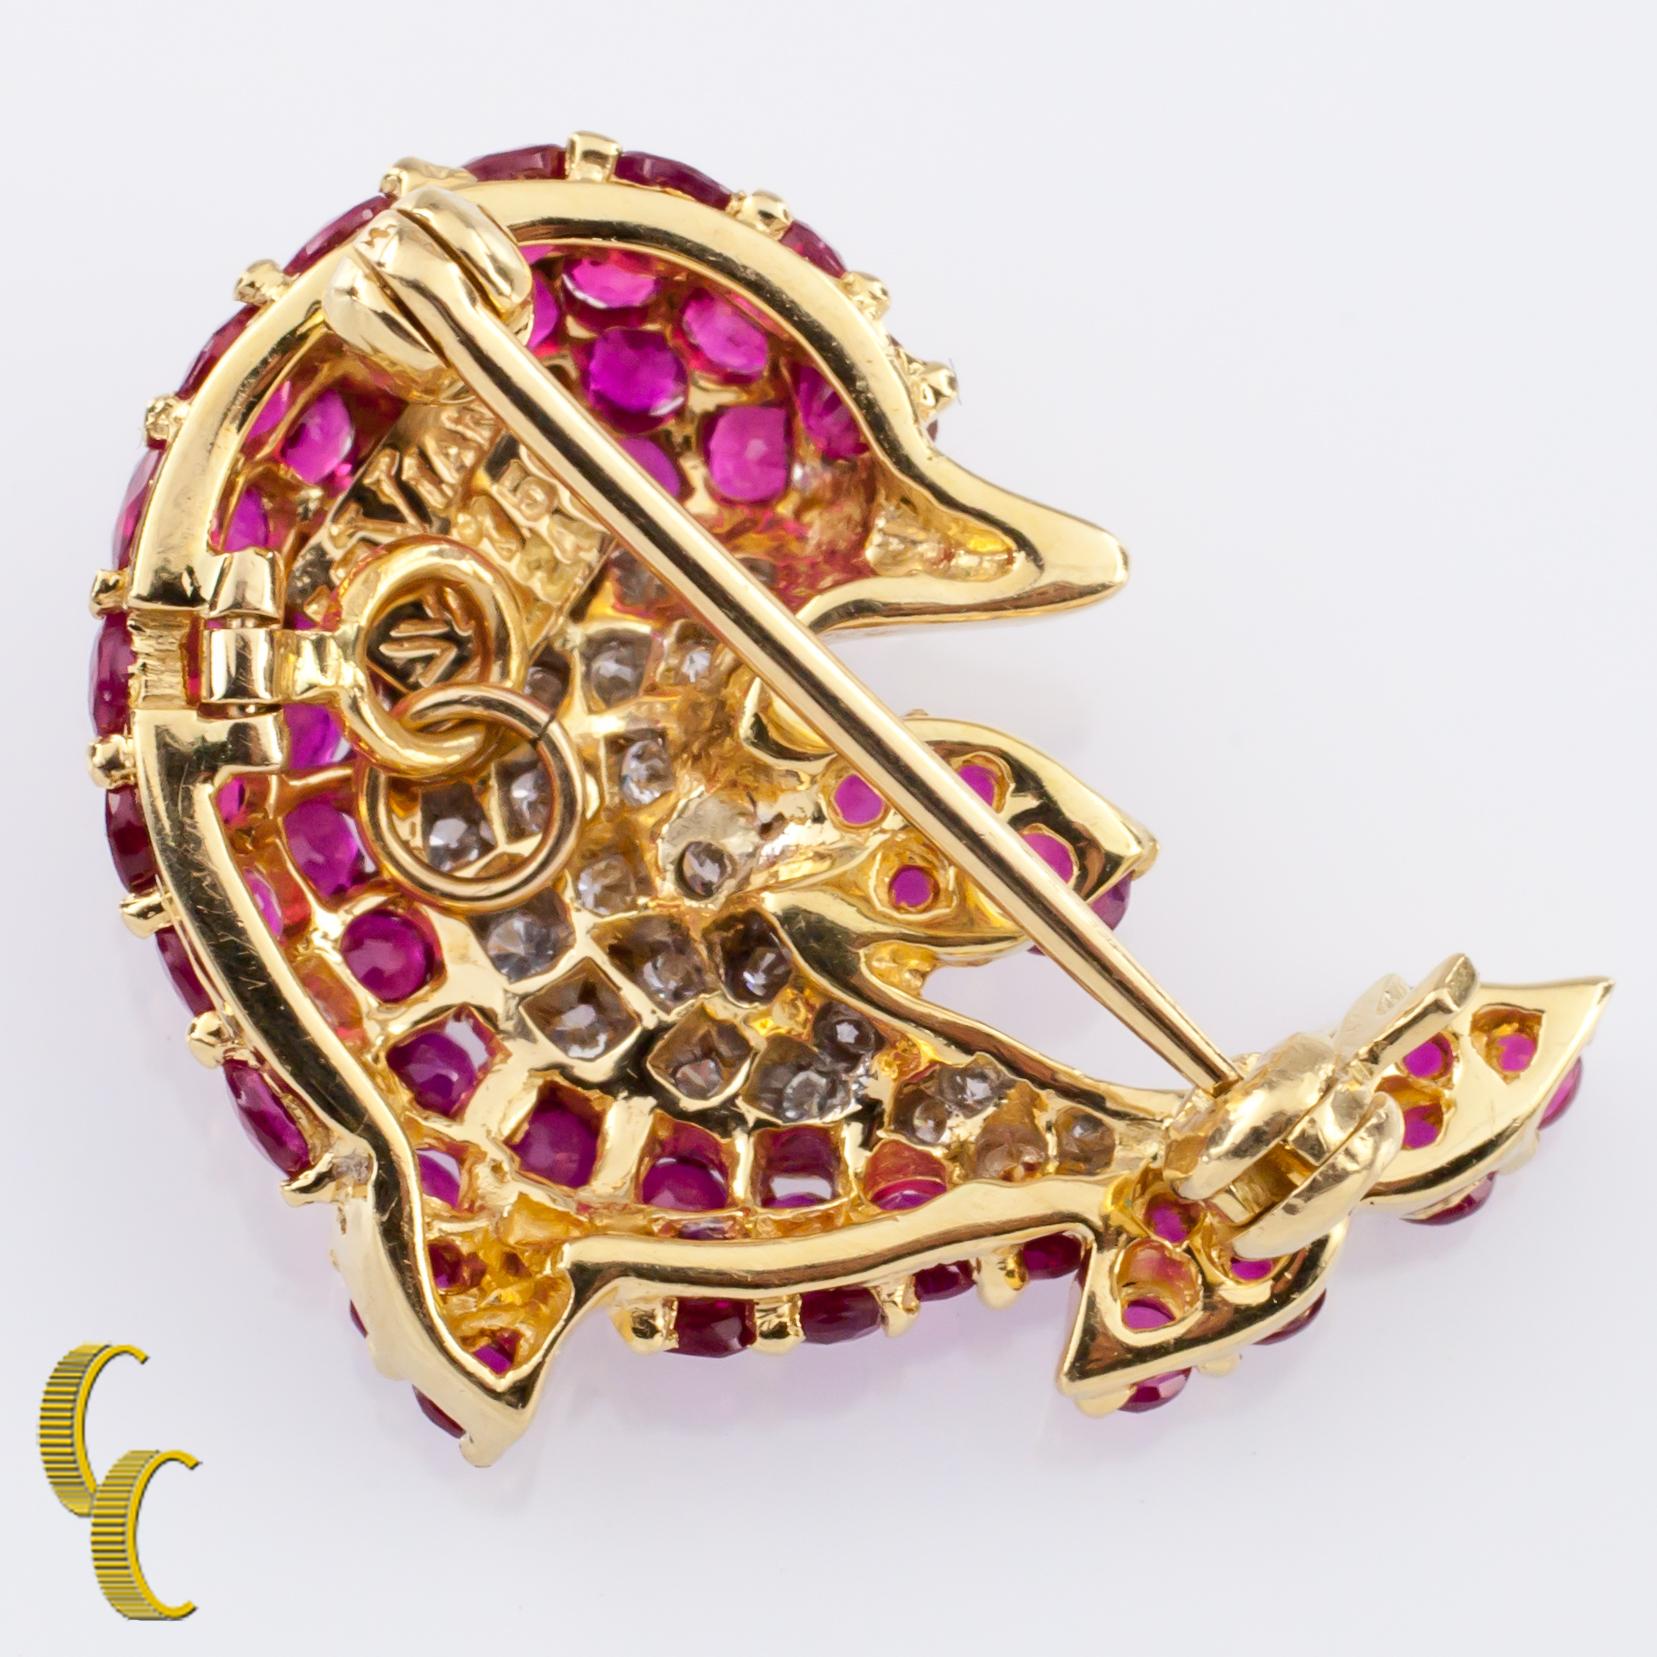 Gorgeous Dolphin Brooch by Le Vian
Includes Pin and Bail to be worn additionally as a pendant
Features Pave Set Rubies and Diamonds with a Green Cabochon stone for the eye
Reverse is hallmarked 